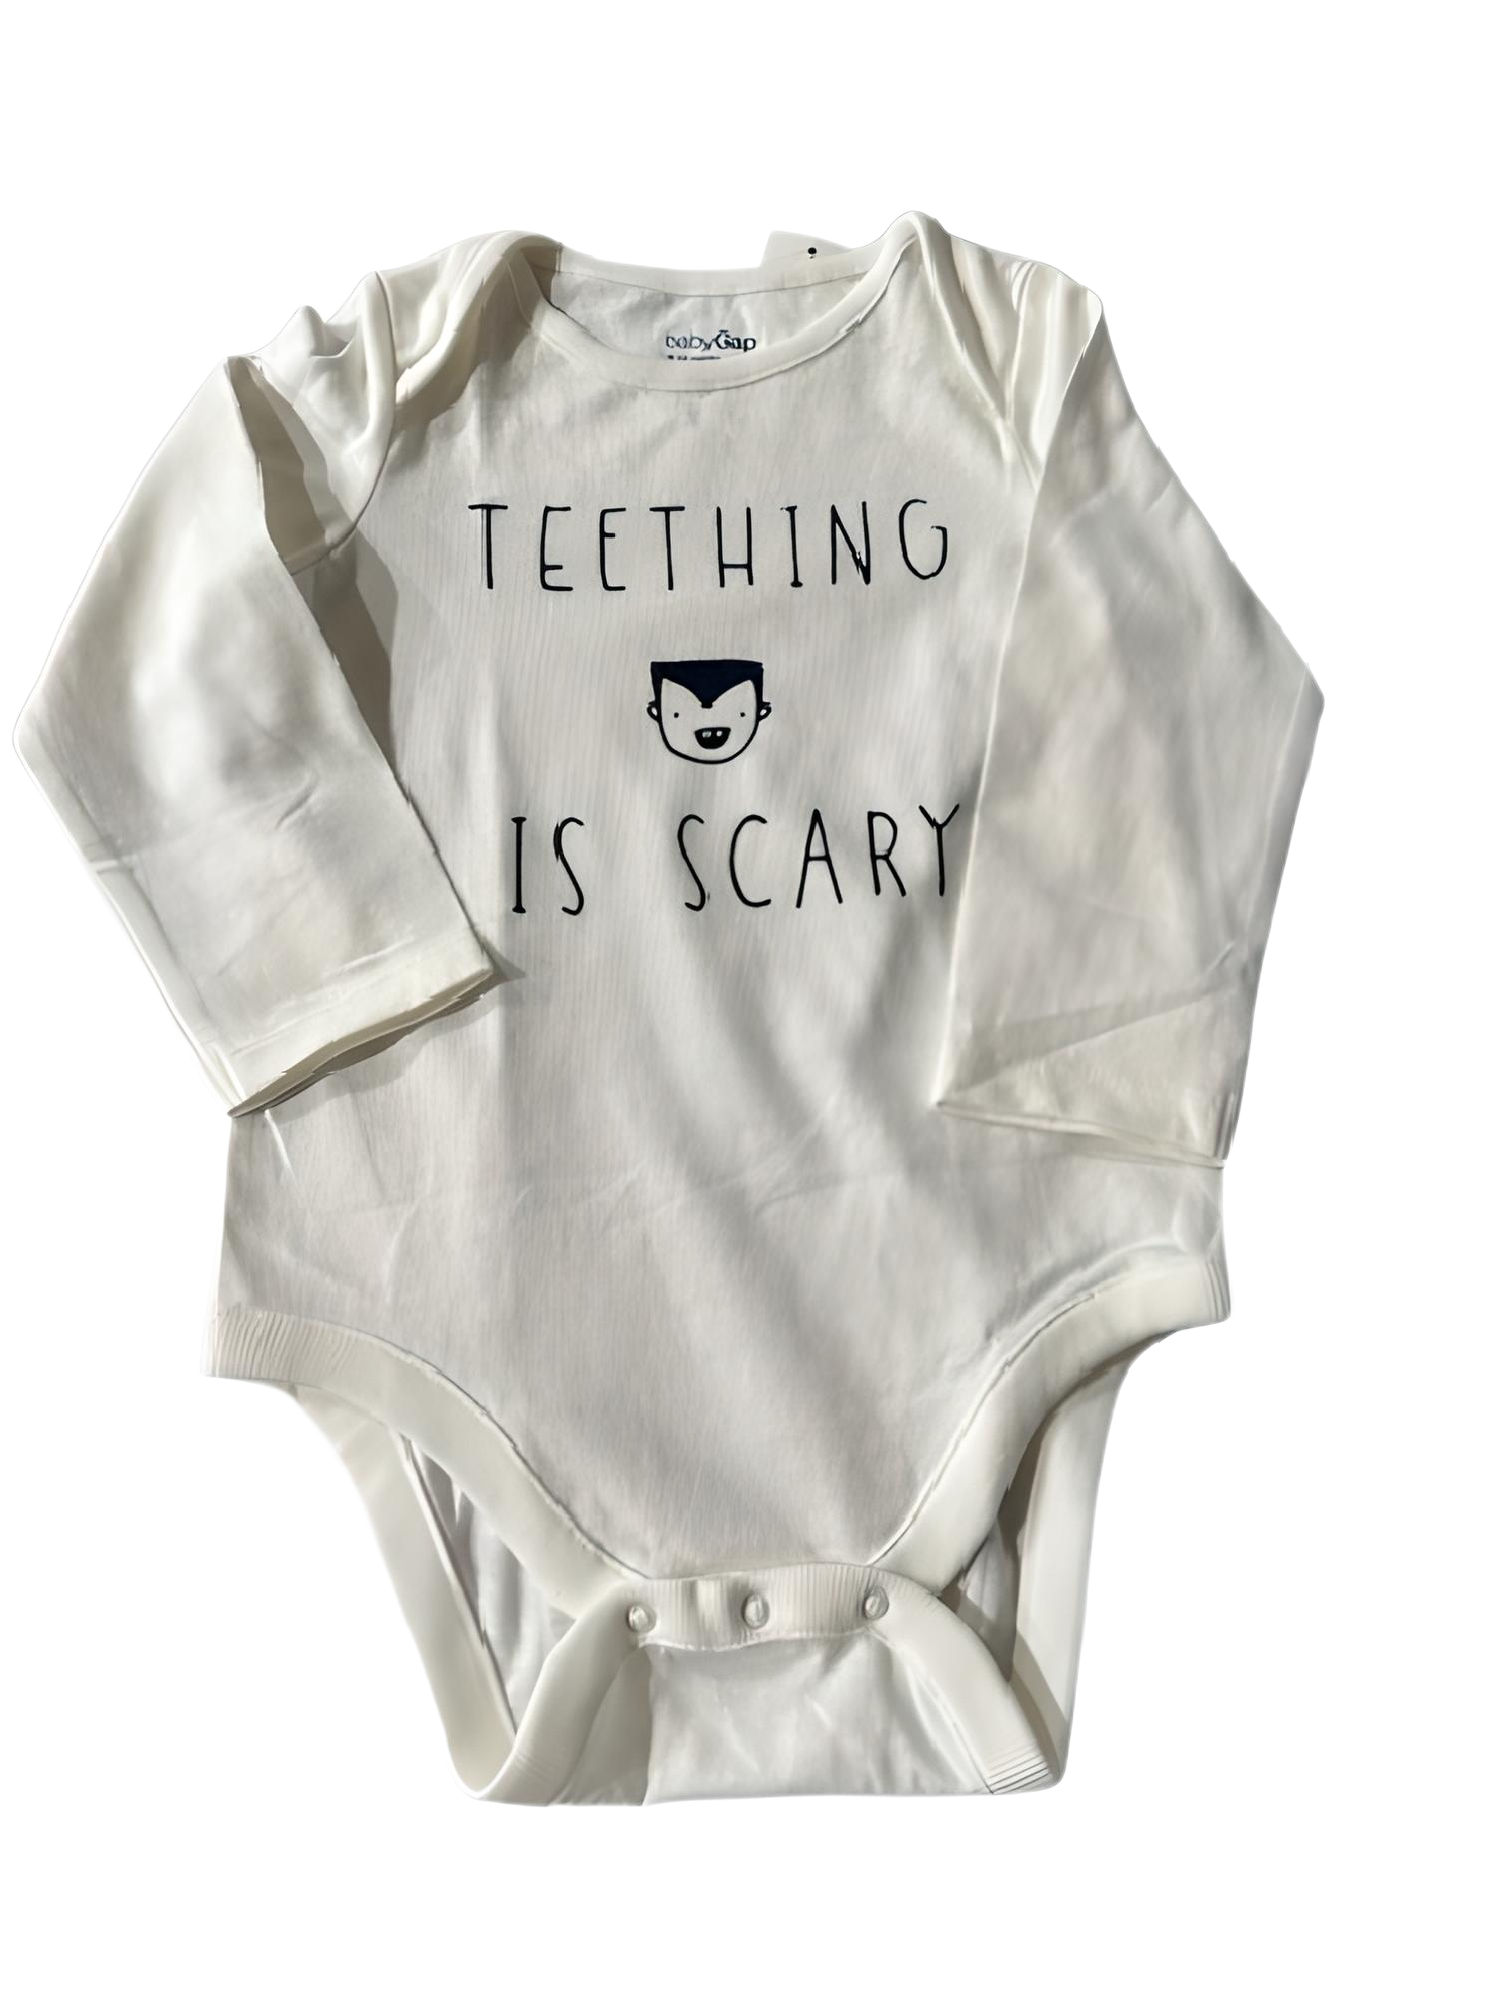 Teething is Scary $$$